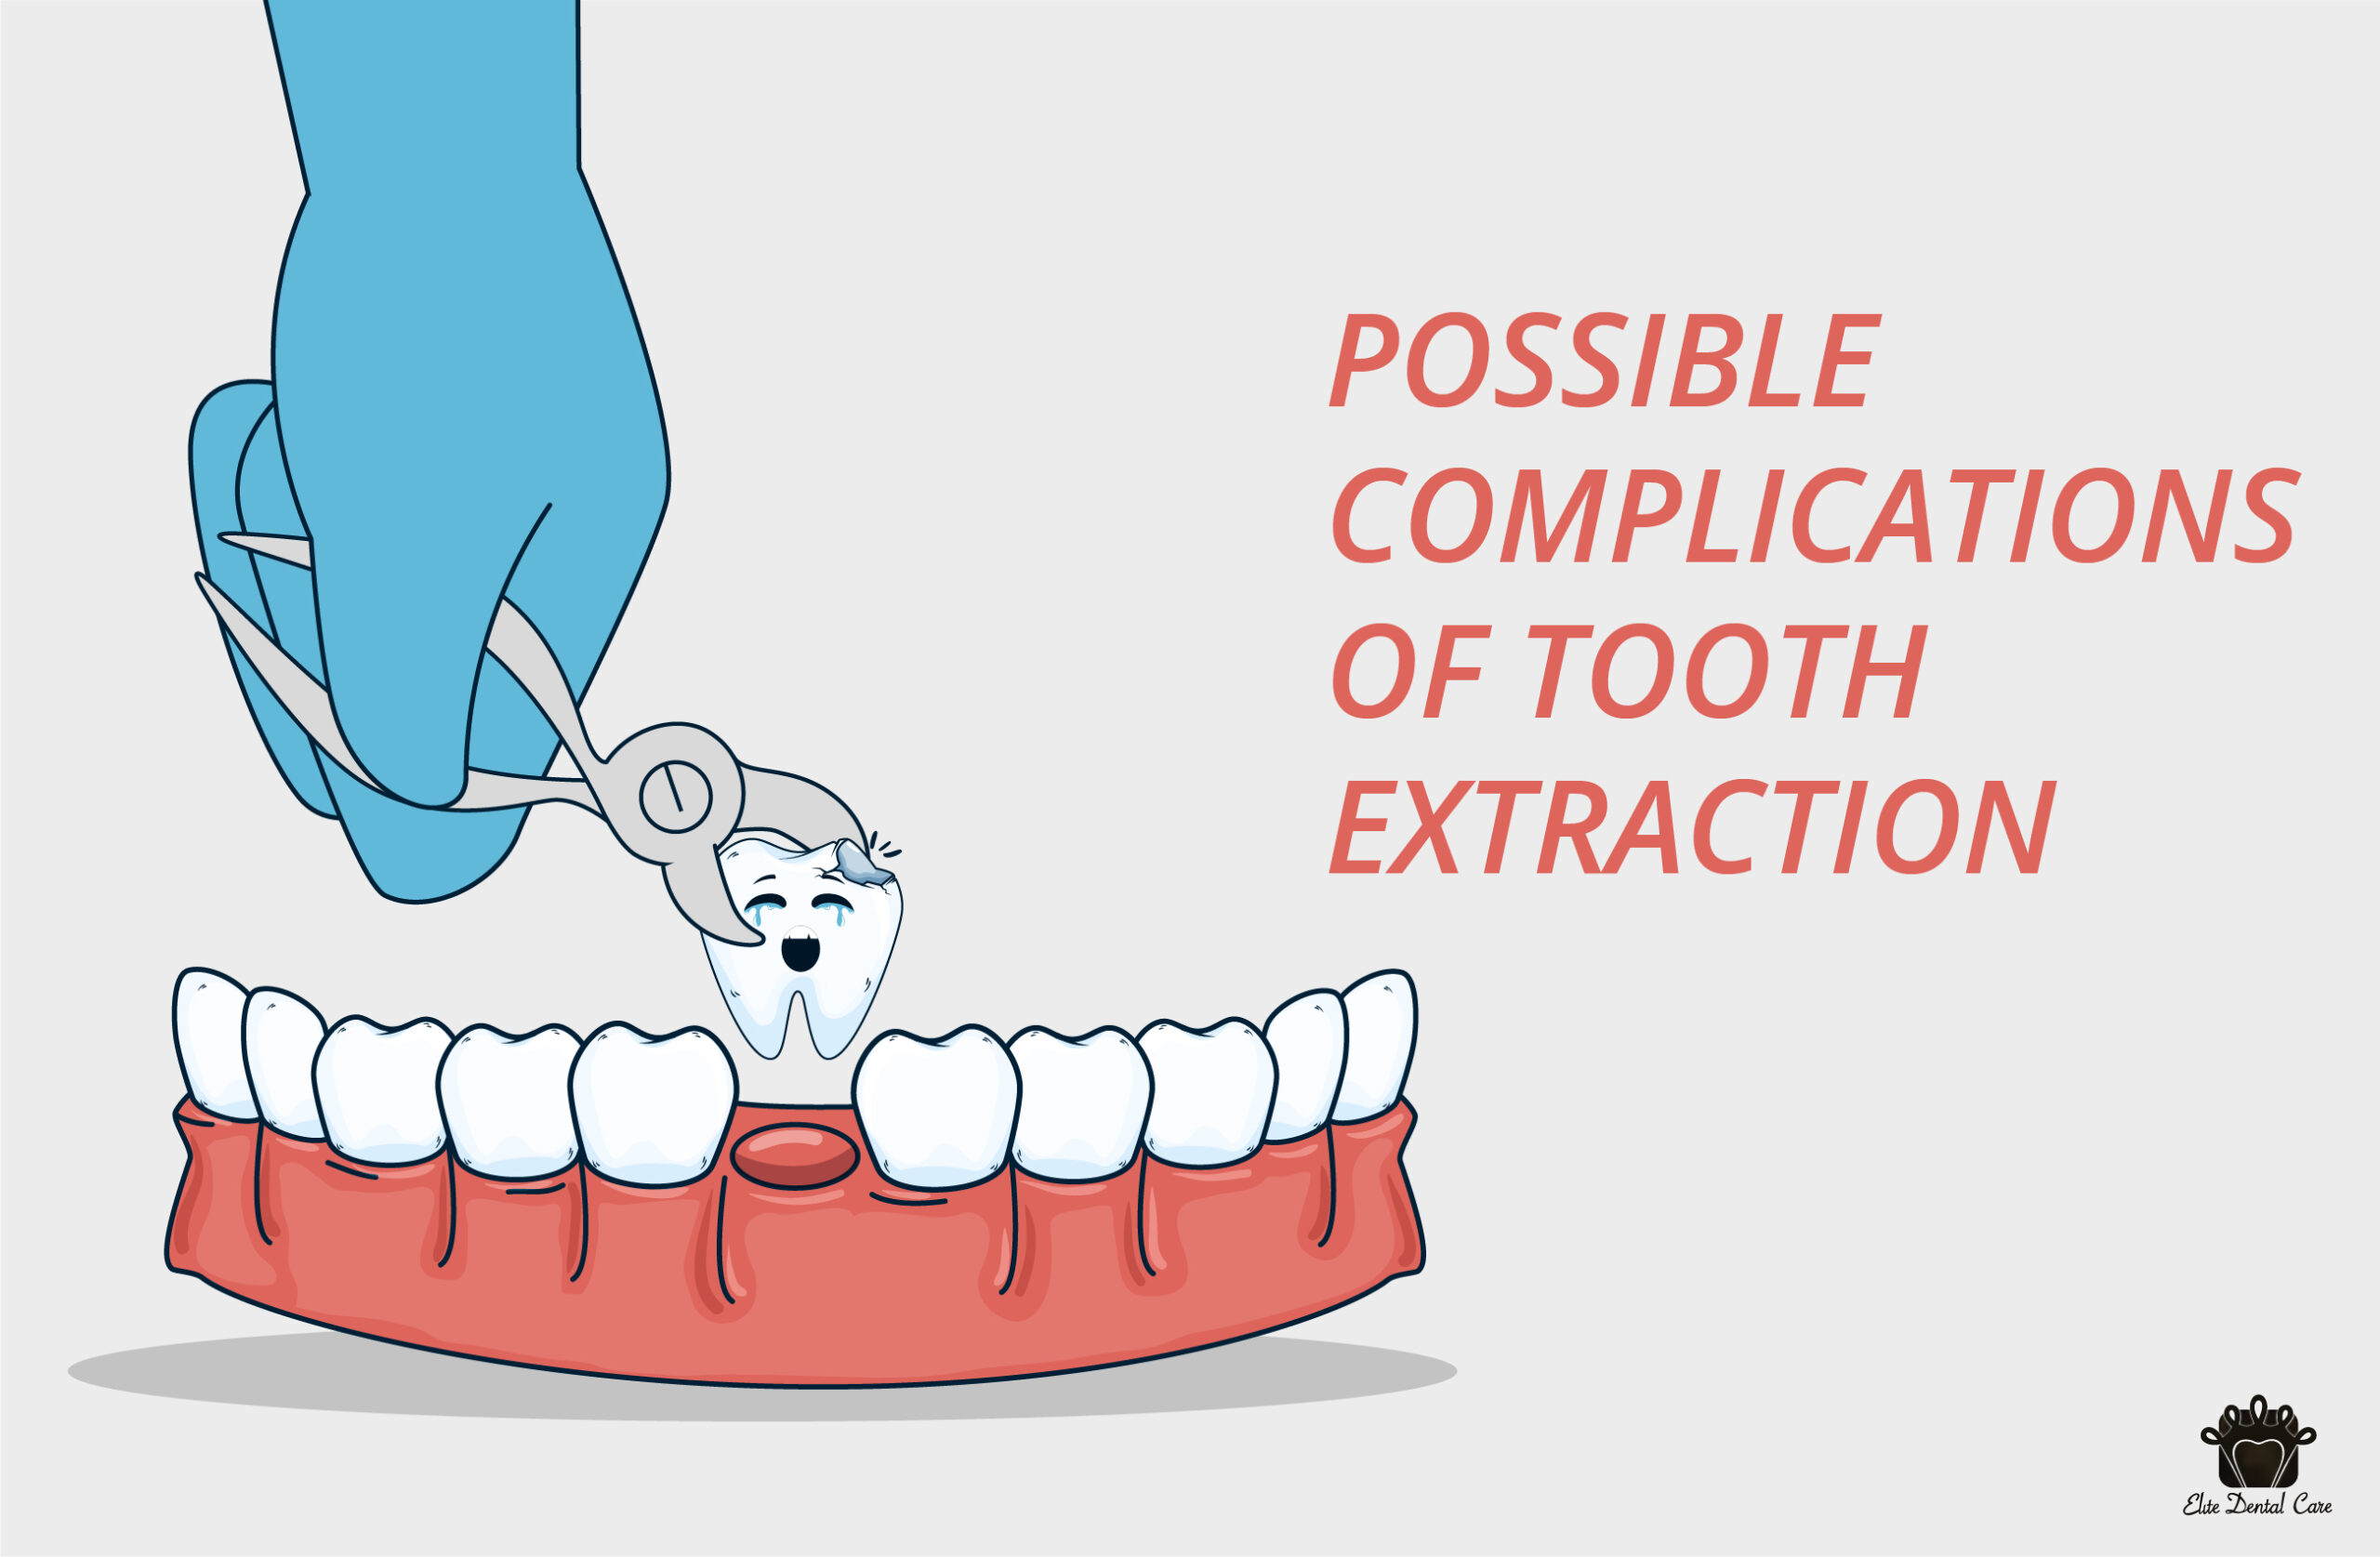 Possible complication of tooth etraction